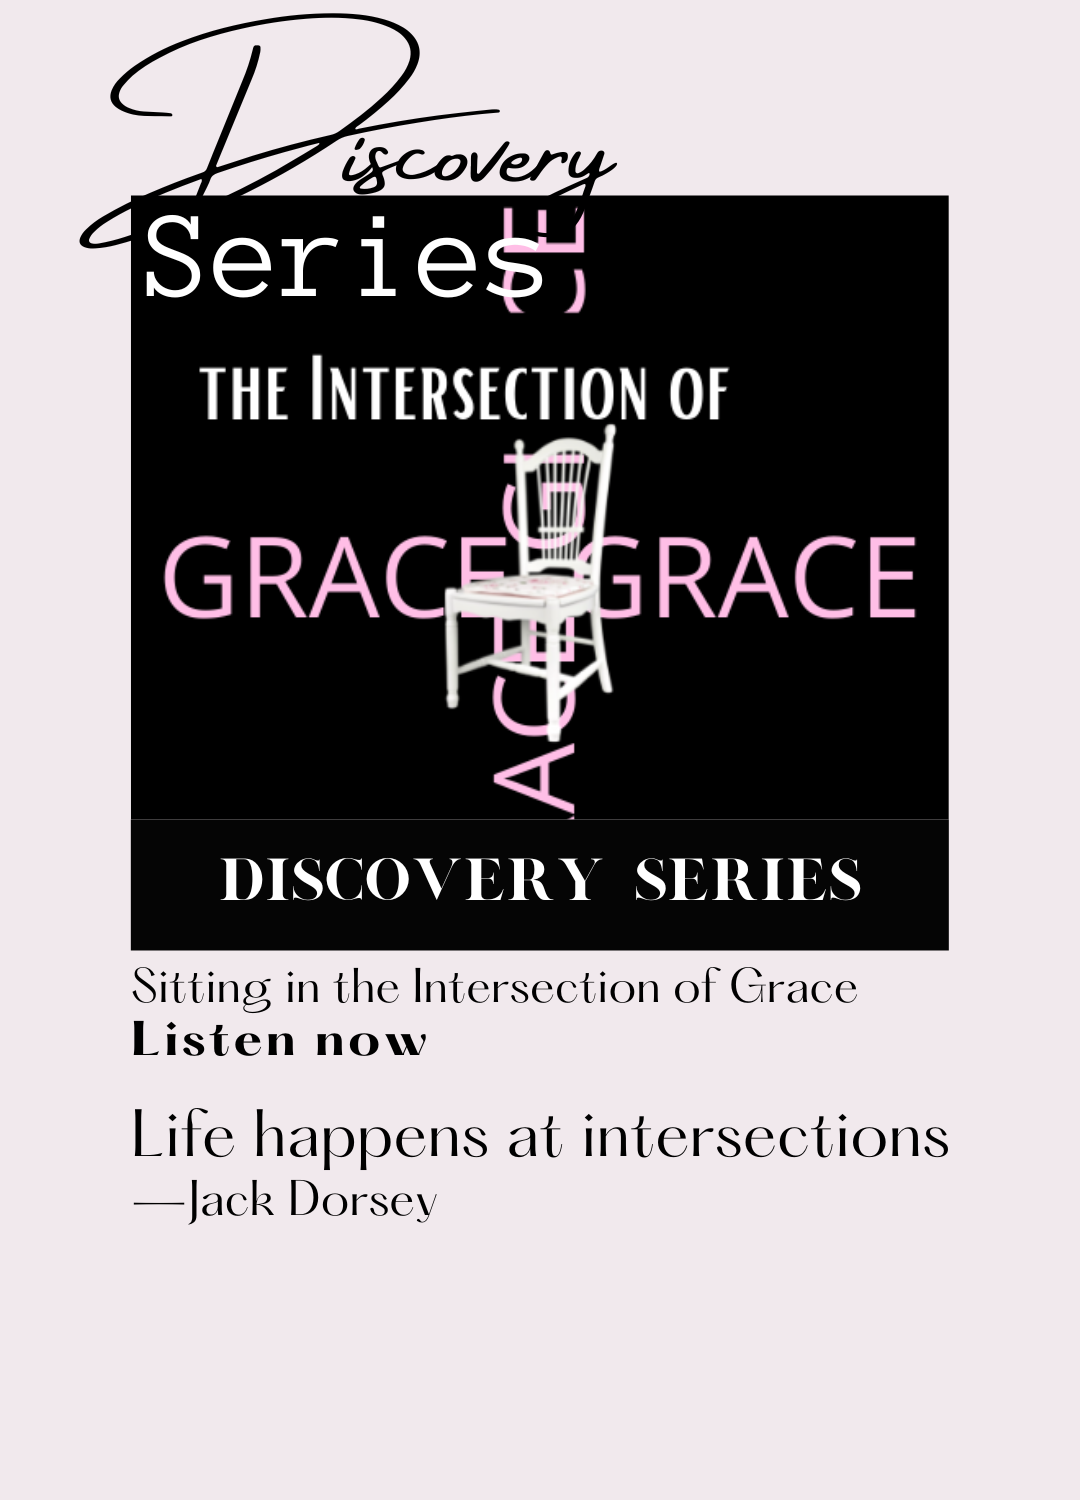 the Intersection of Grace, episode 